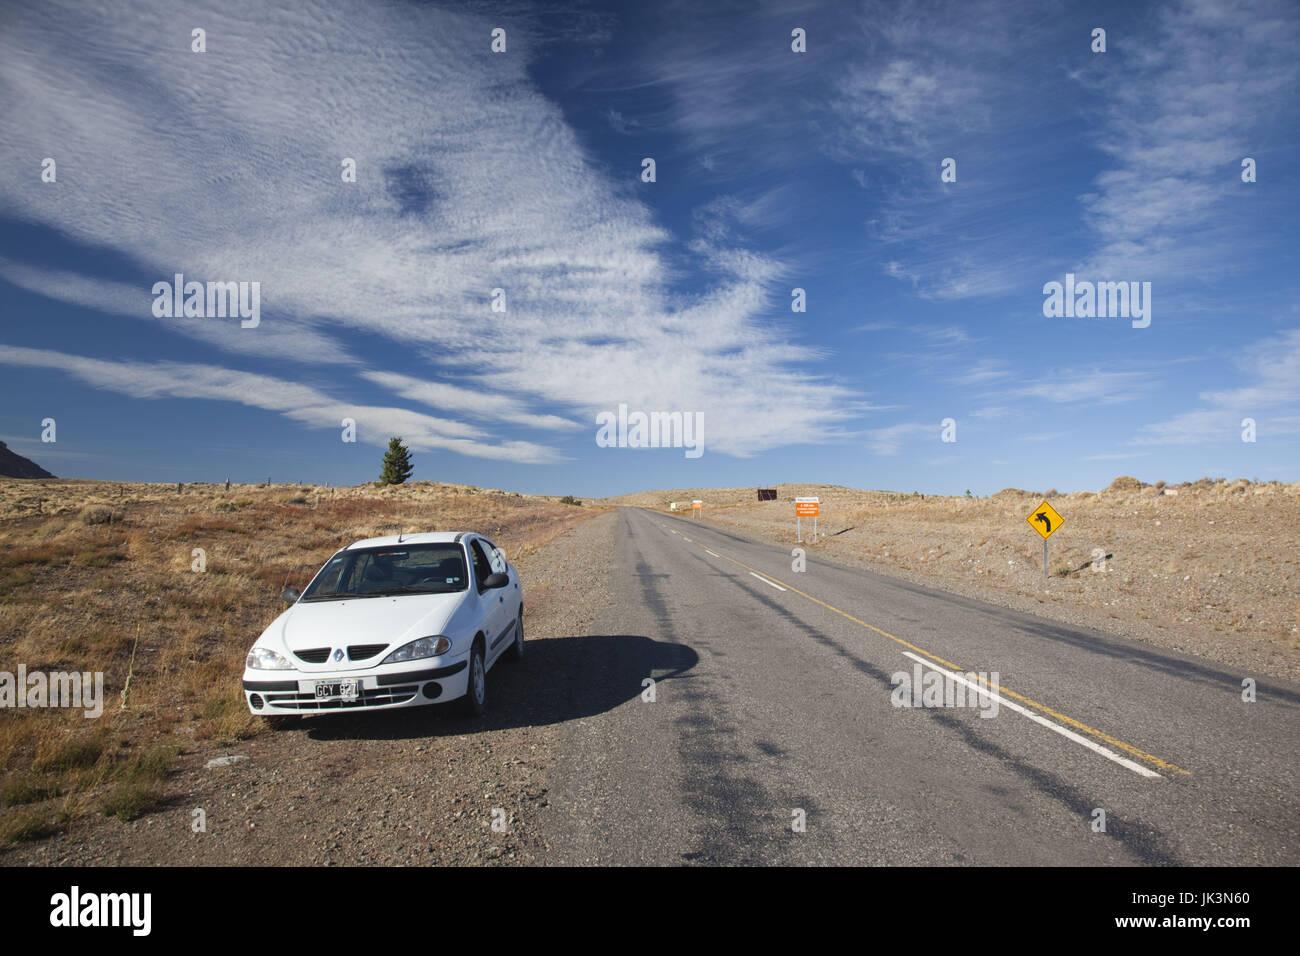 Argentina, Patagonia, Chubut Provincia, RN 40, centrale Chubut Foto Stock